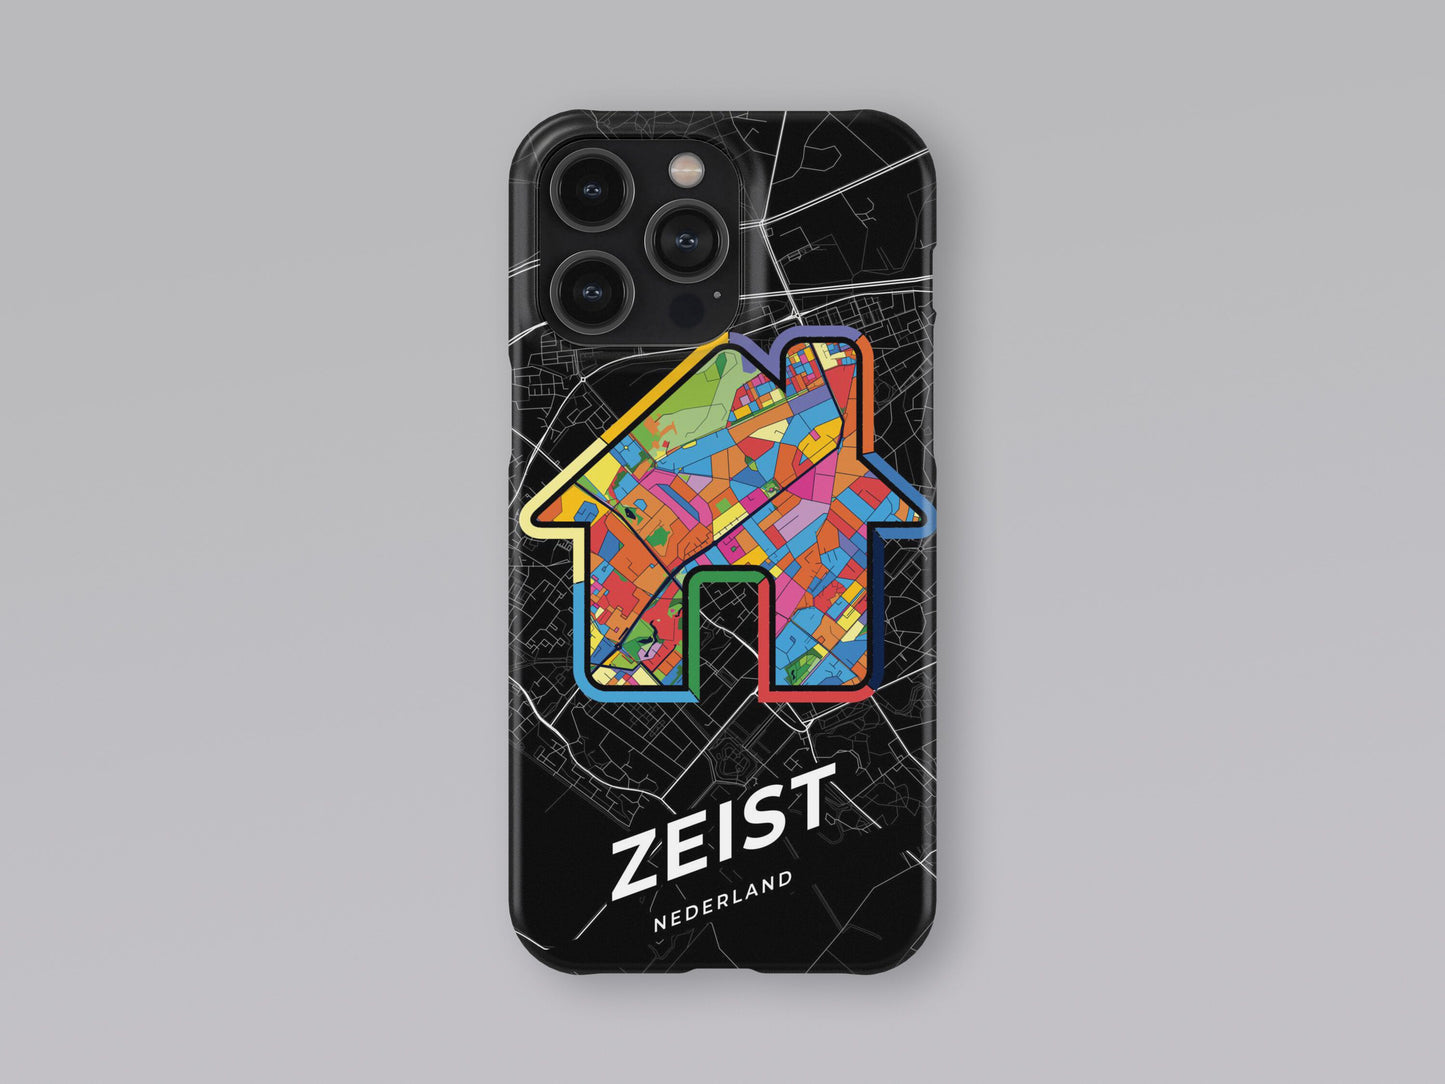 Zeist Netherlands slim phone case with colorful icon 3